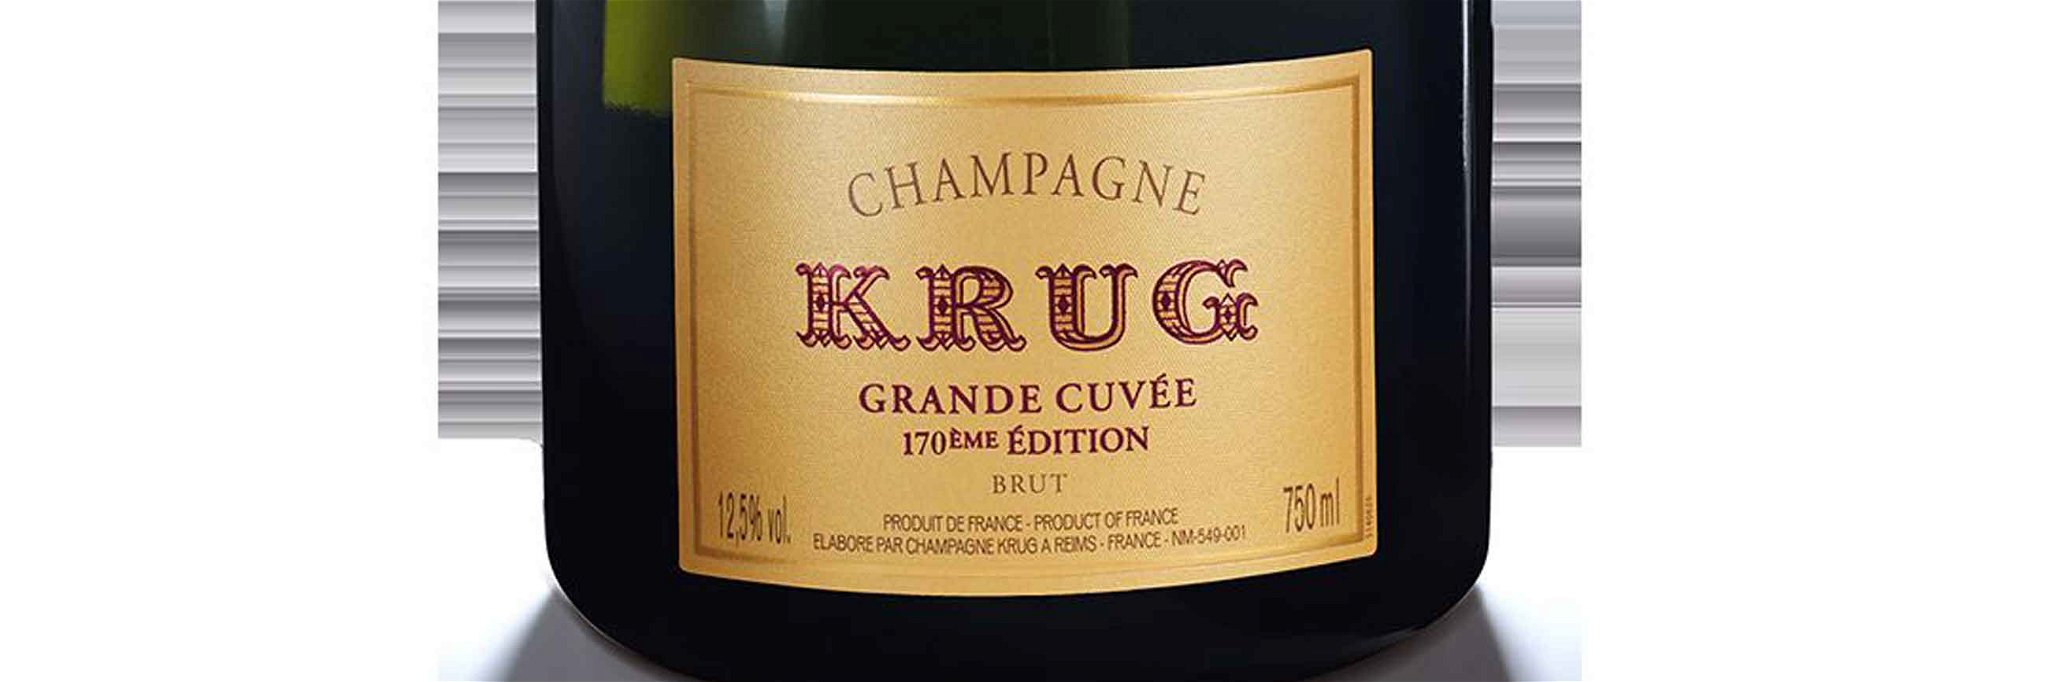 The 170th Edition of of Krug Grande Cuvée&nbsp;